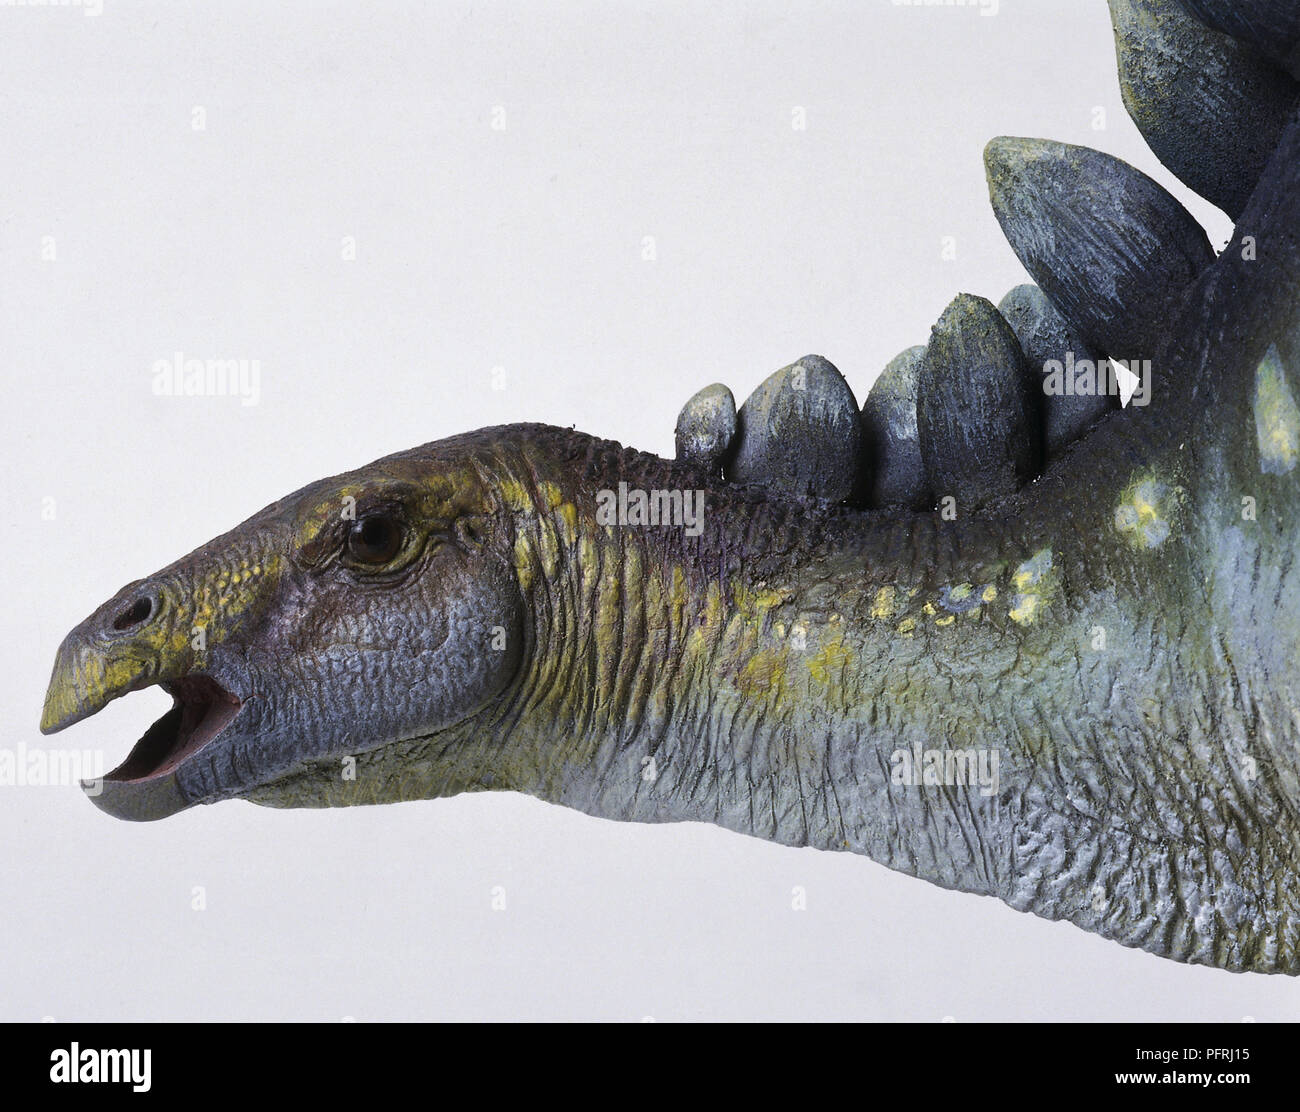 Side view of head with mouth open, a model of the head of a plated dinosaur, Stegosaurus, with distinctive leaf shaped armour plates running in two rows from the base of the skull. The long flat forehead ends in a curved beak. Stock Photo